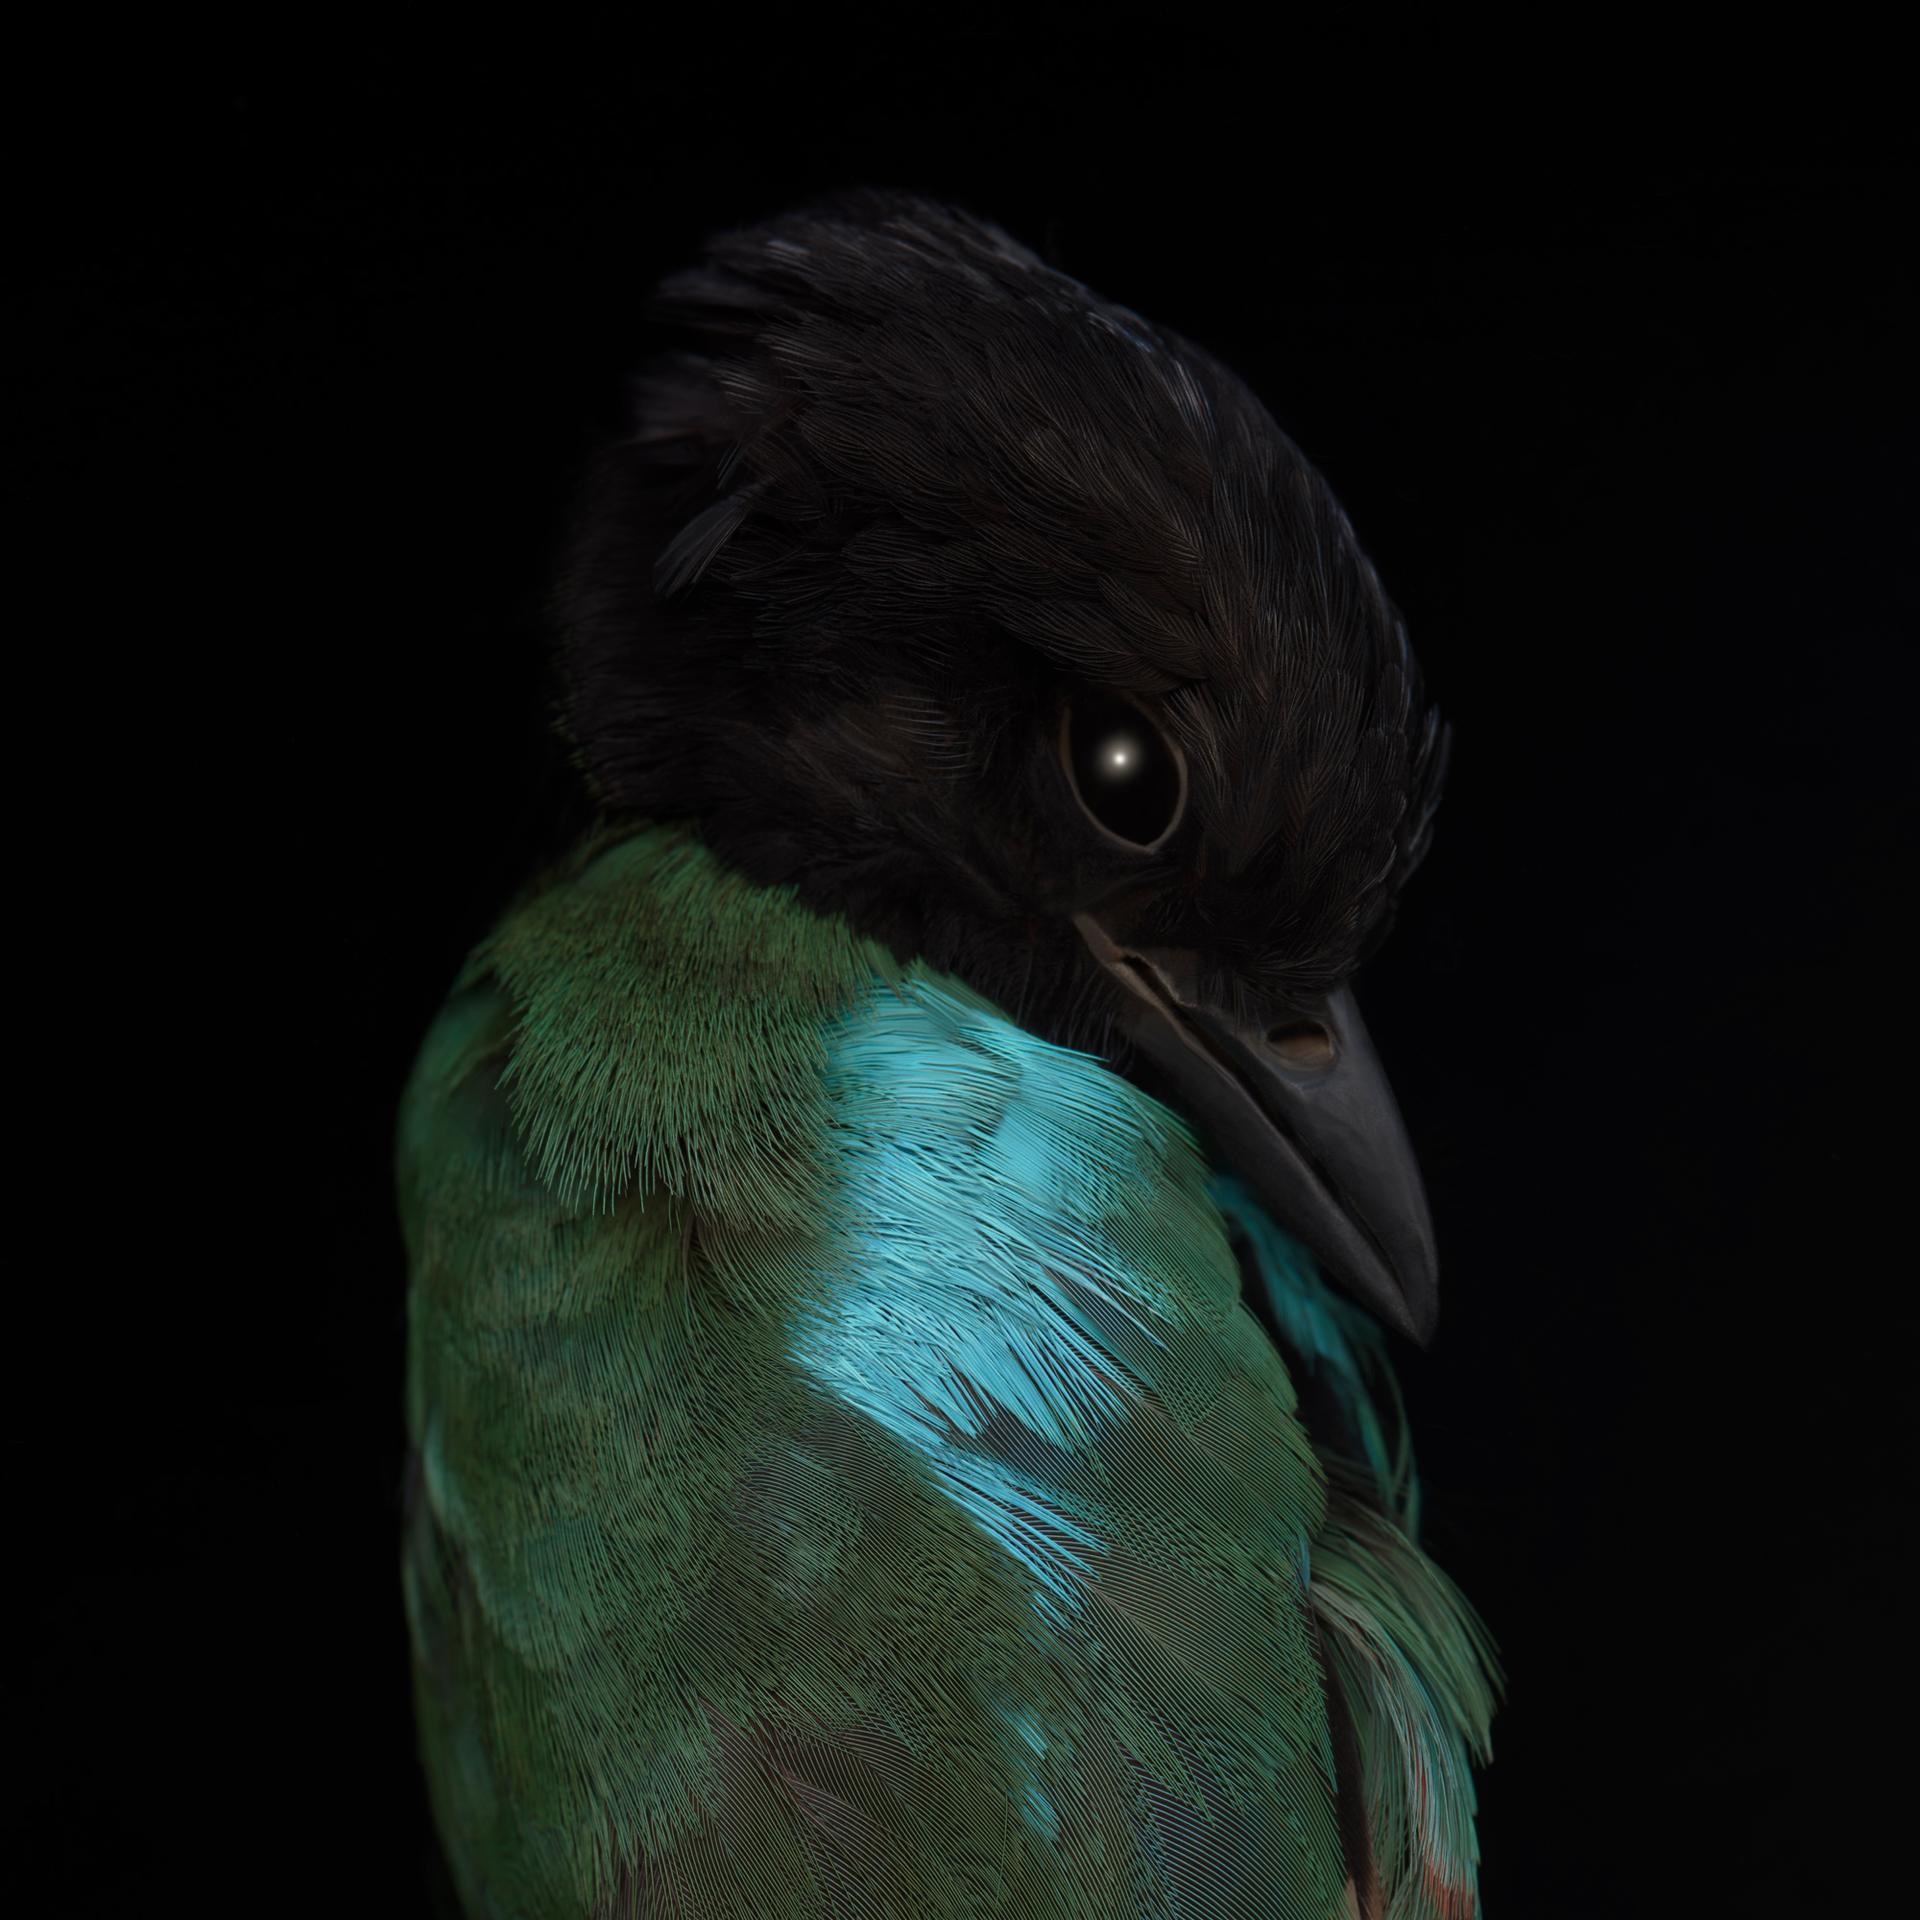 The hooded pitta